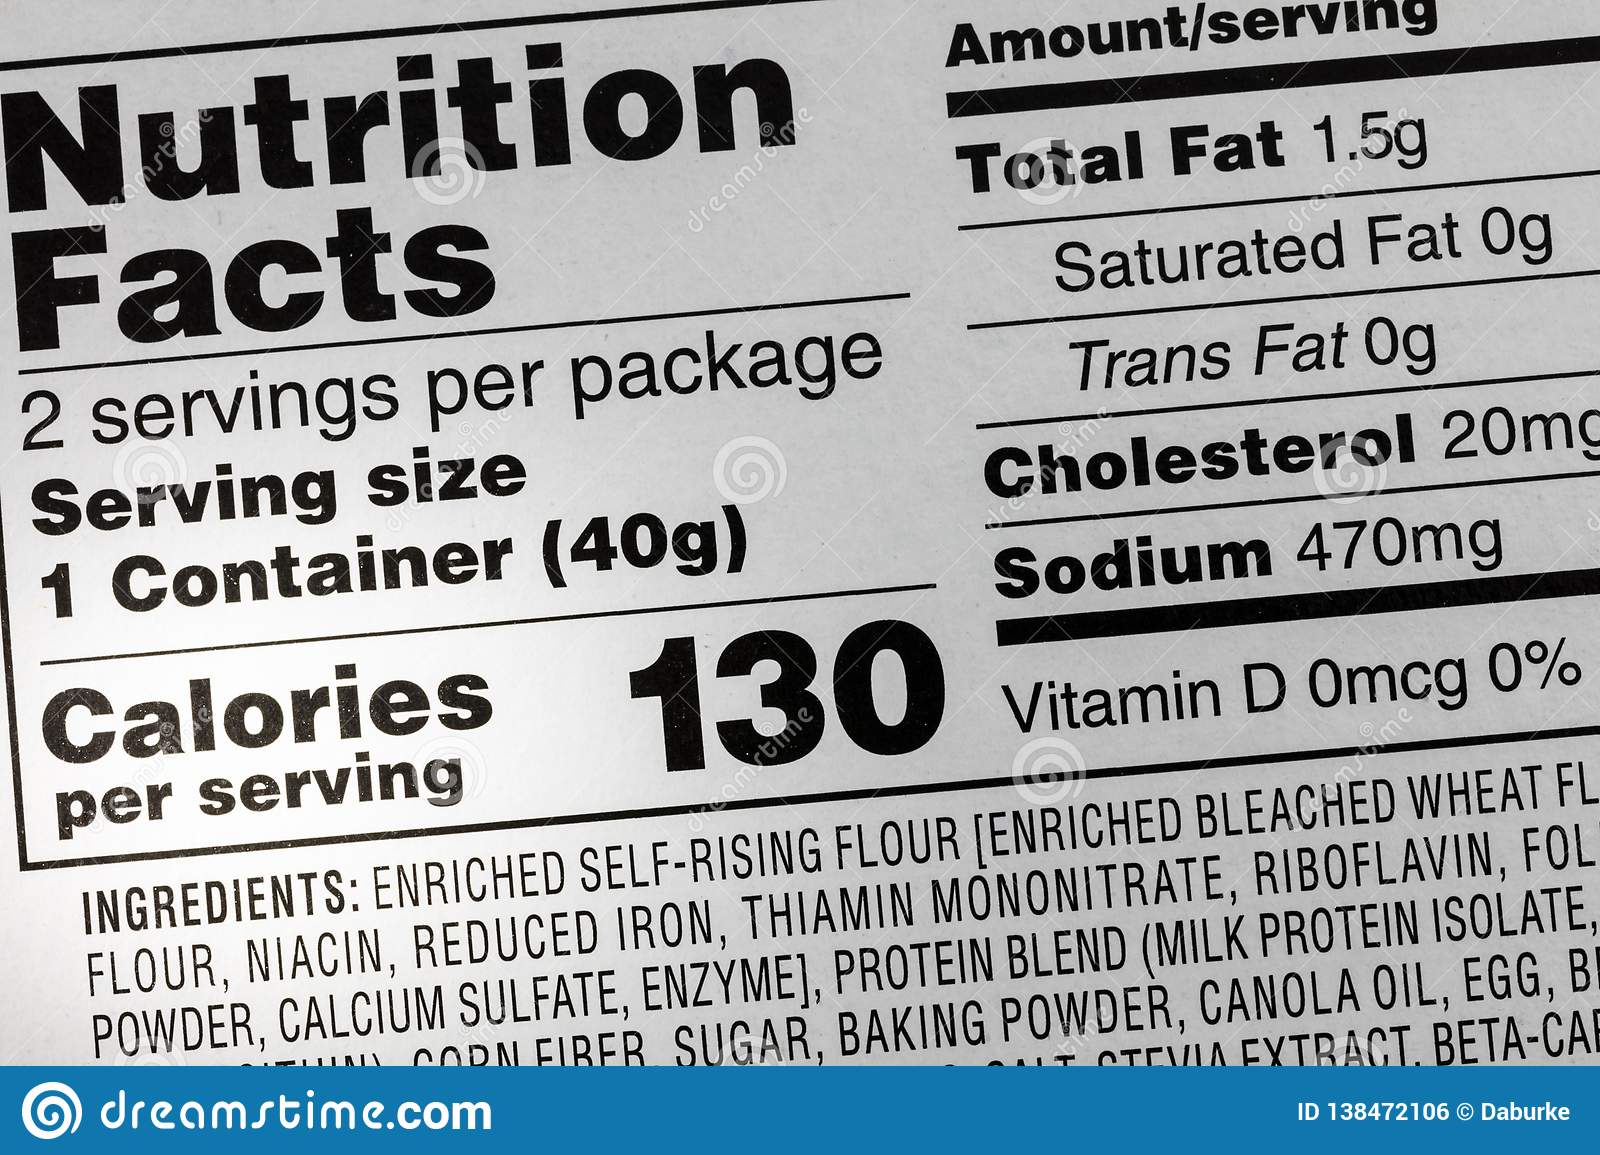 how do nutrition labels determine how much energy calories foods contain